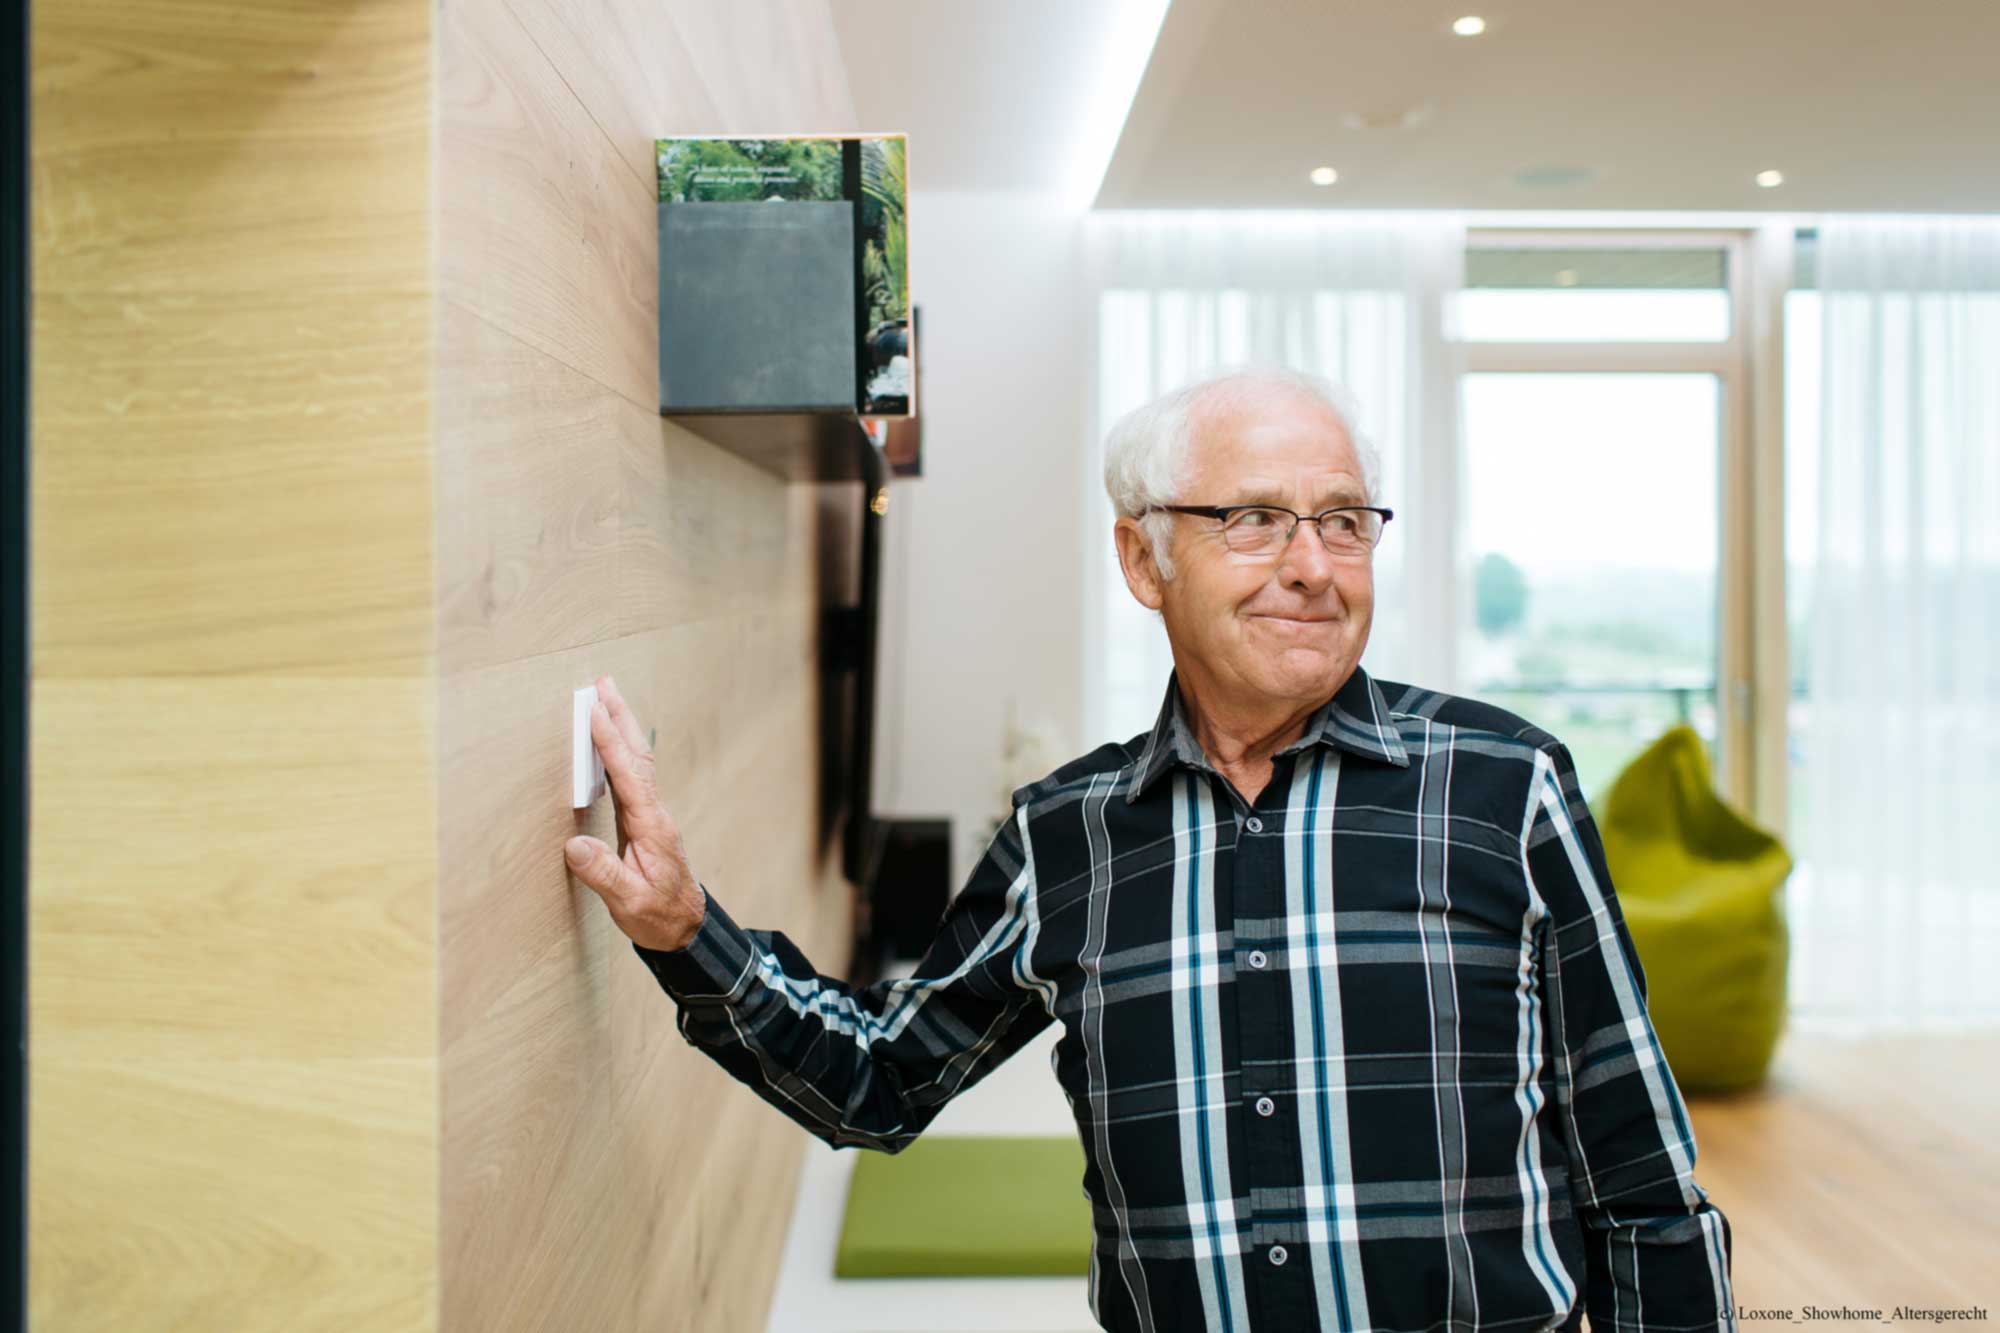 Senior bedient Touch Taster - Selbstbestimmtes Leben im Smart Home - Ambient Assisted Living